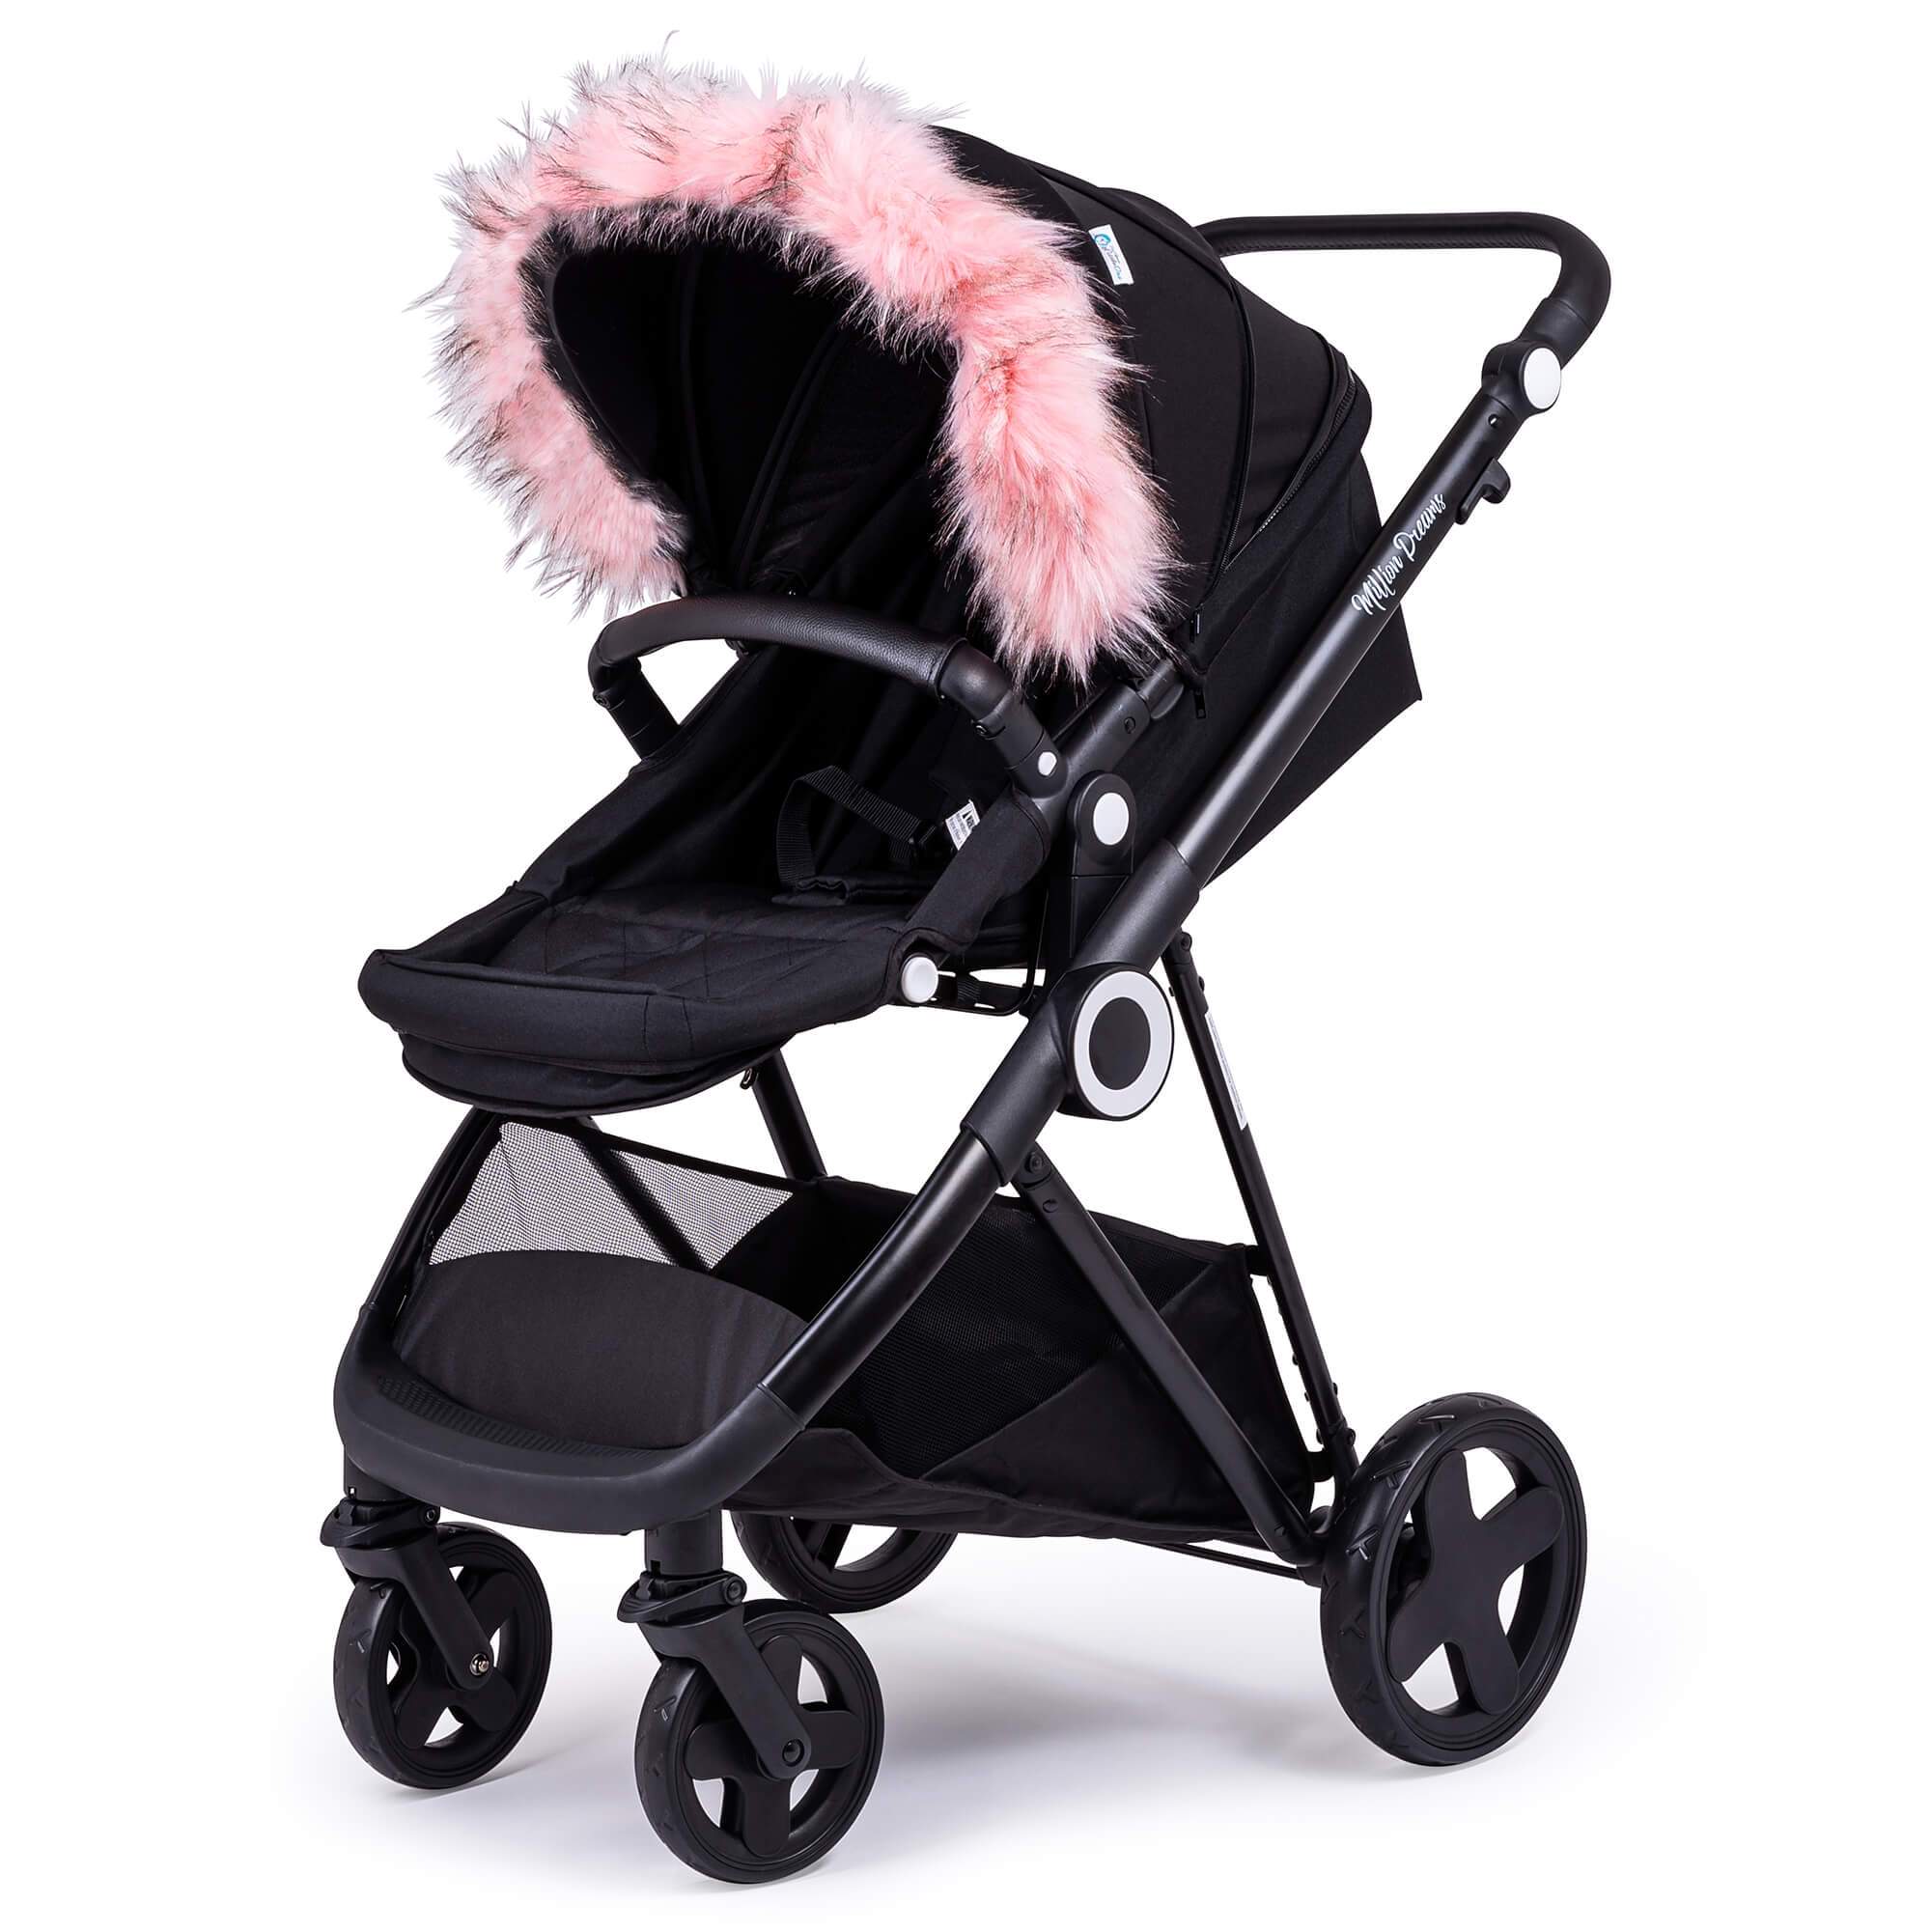 Pram Fur Hood Trim Attachment for Pushchair Compatible with Casual - Light Pink / Fits All Models | For Your Little One